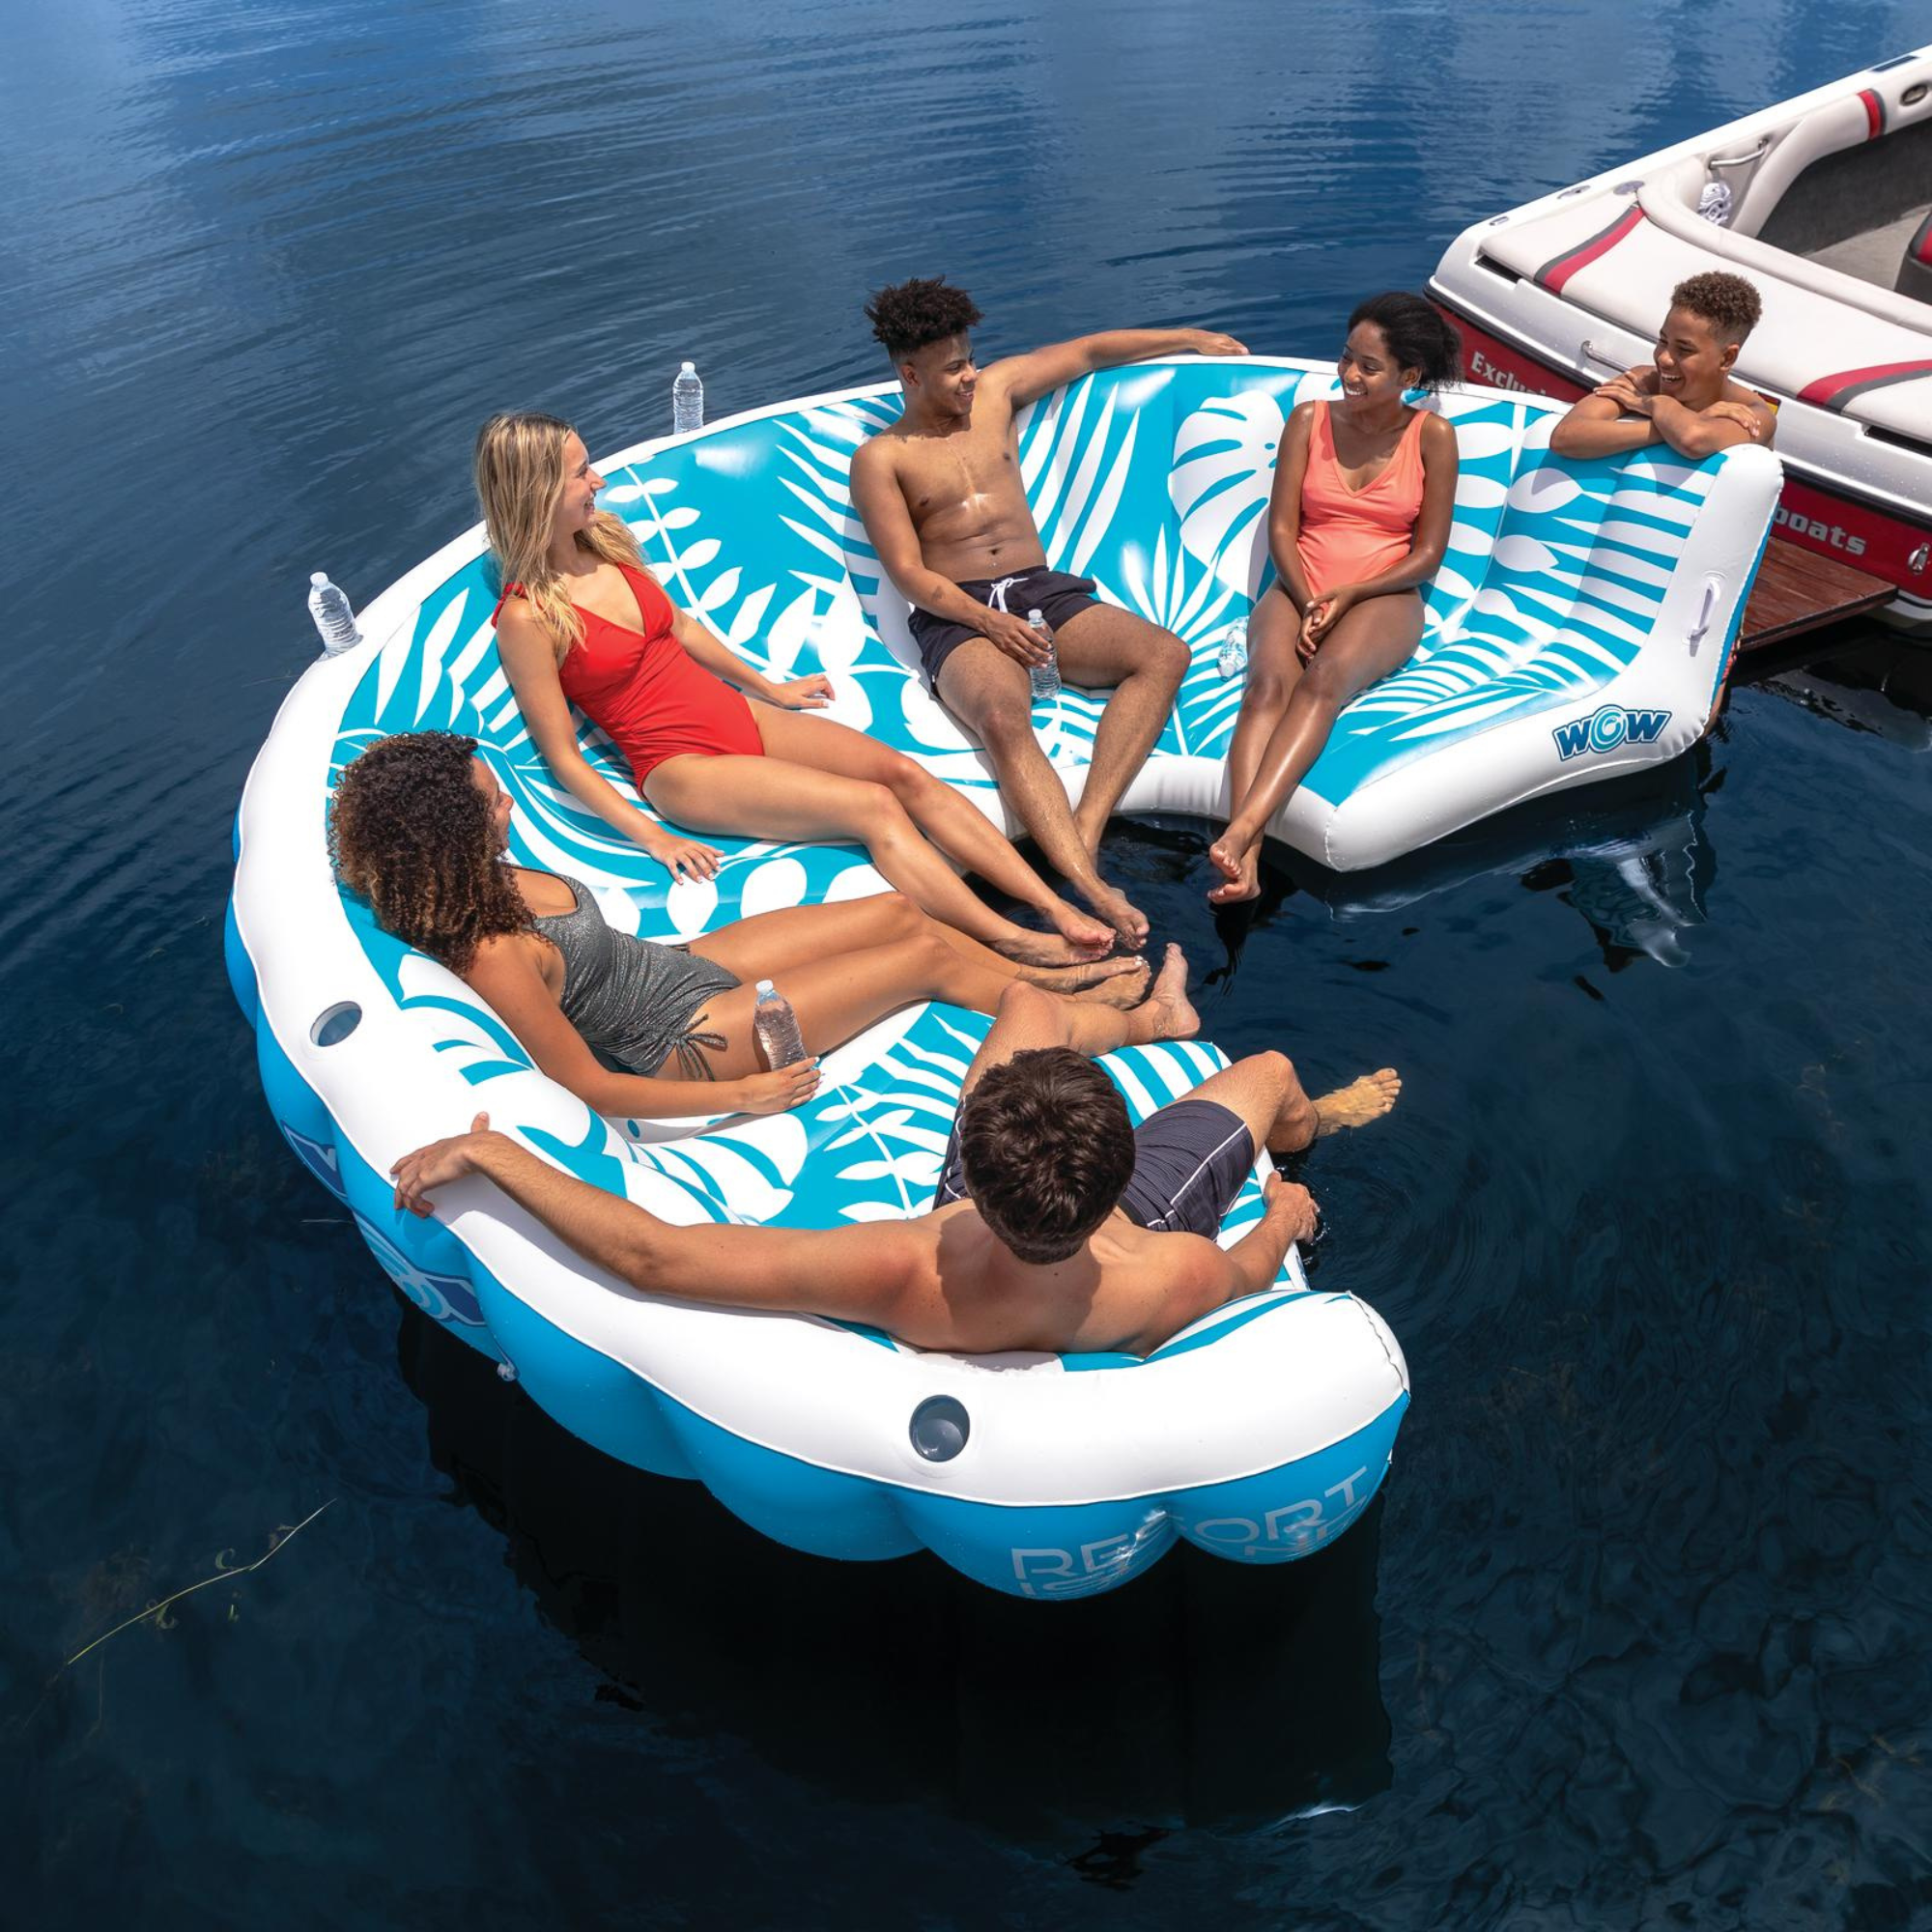 WOW World of Watersports WOW Sports Inflatable Lounging Resort Island for 6-8 People